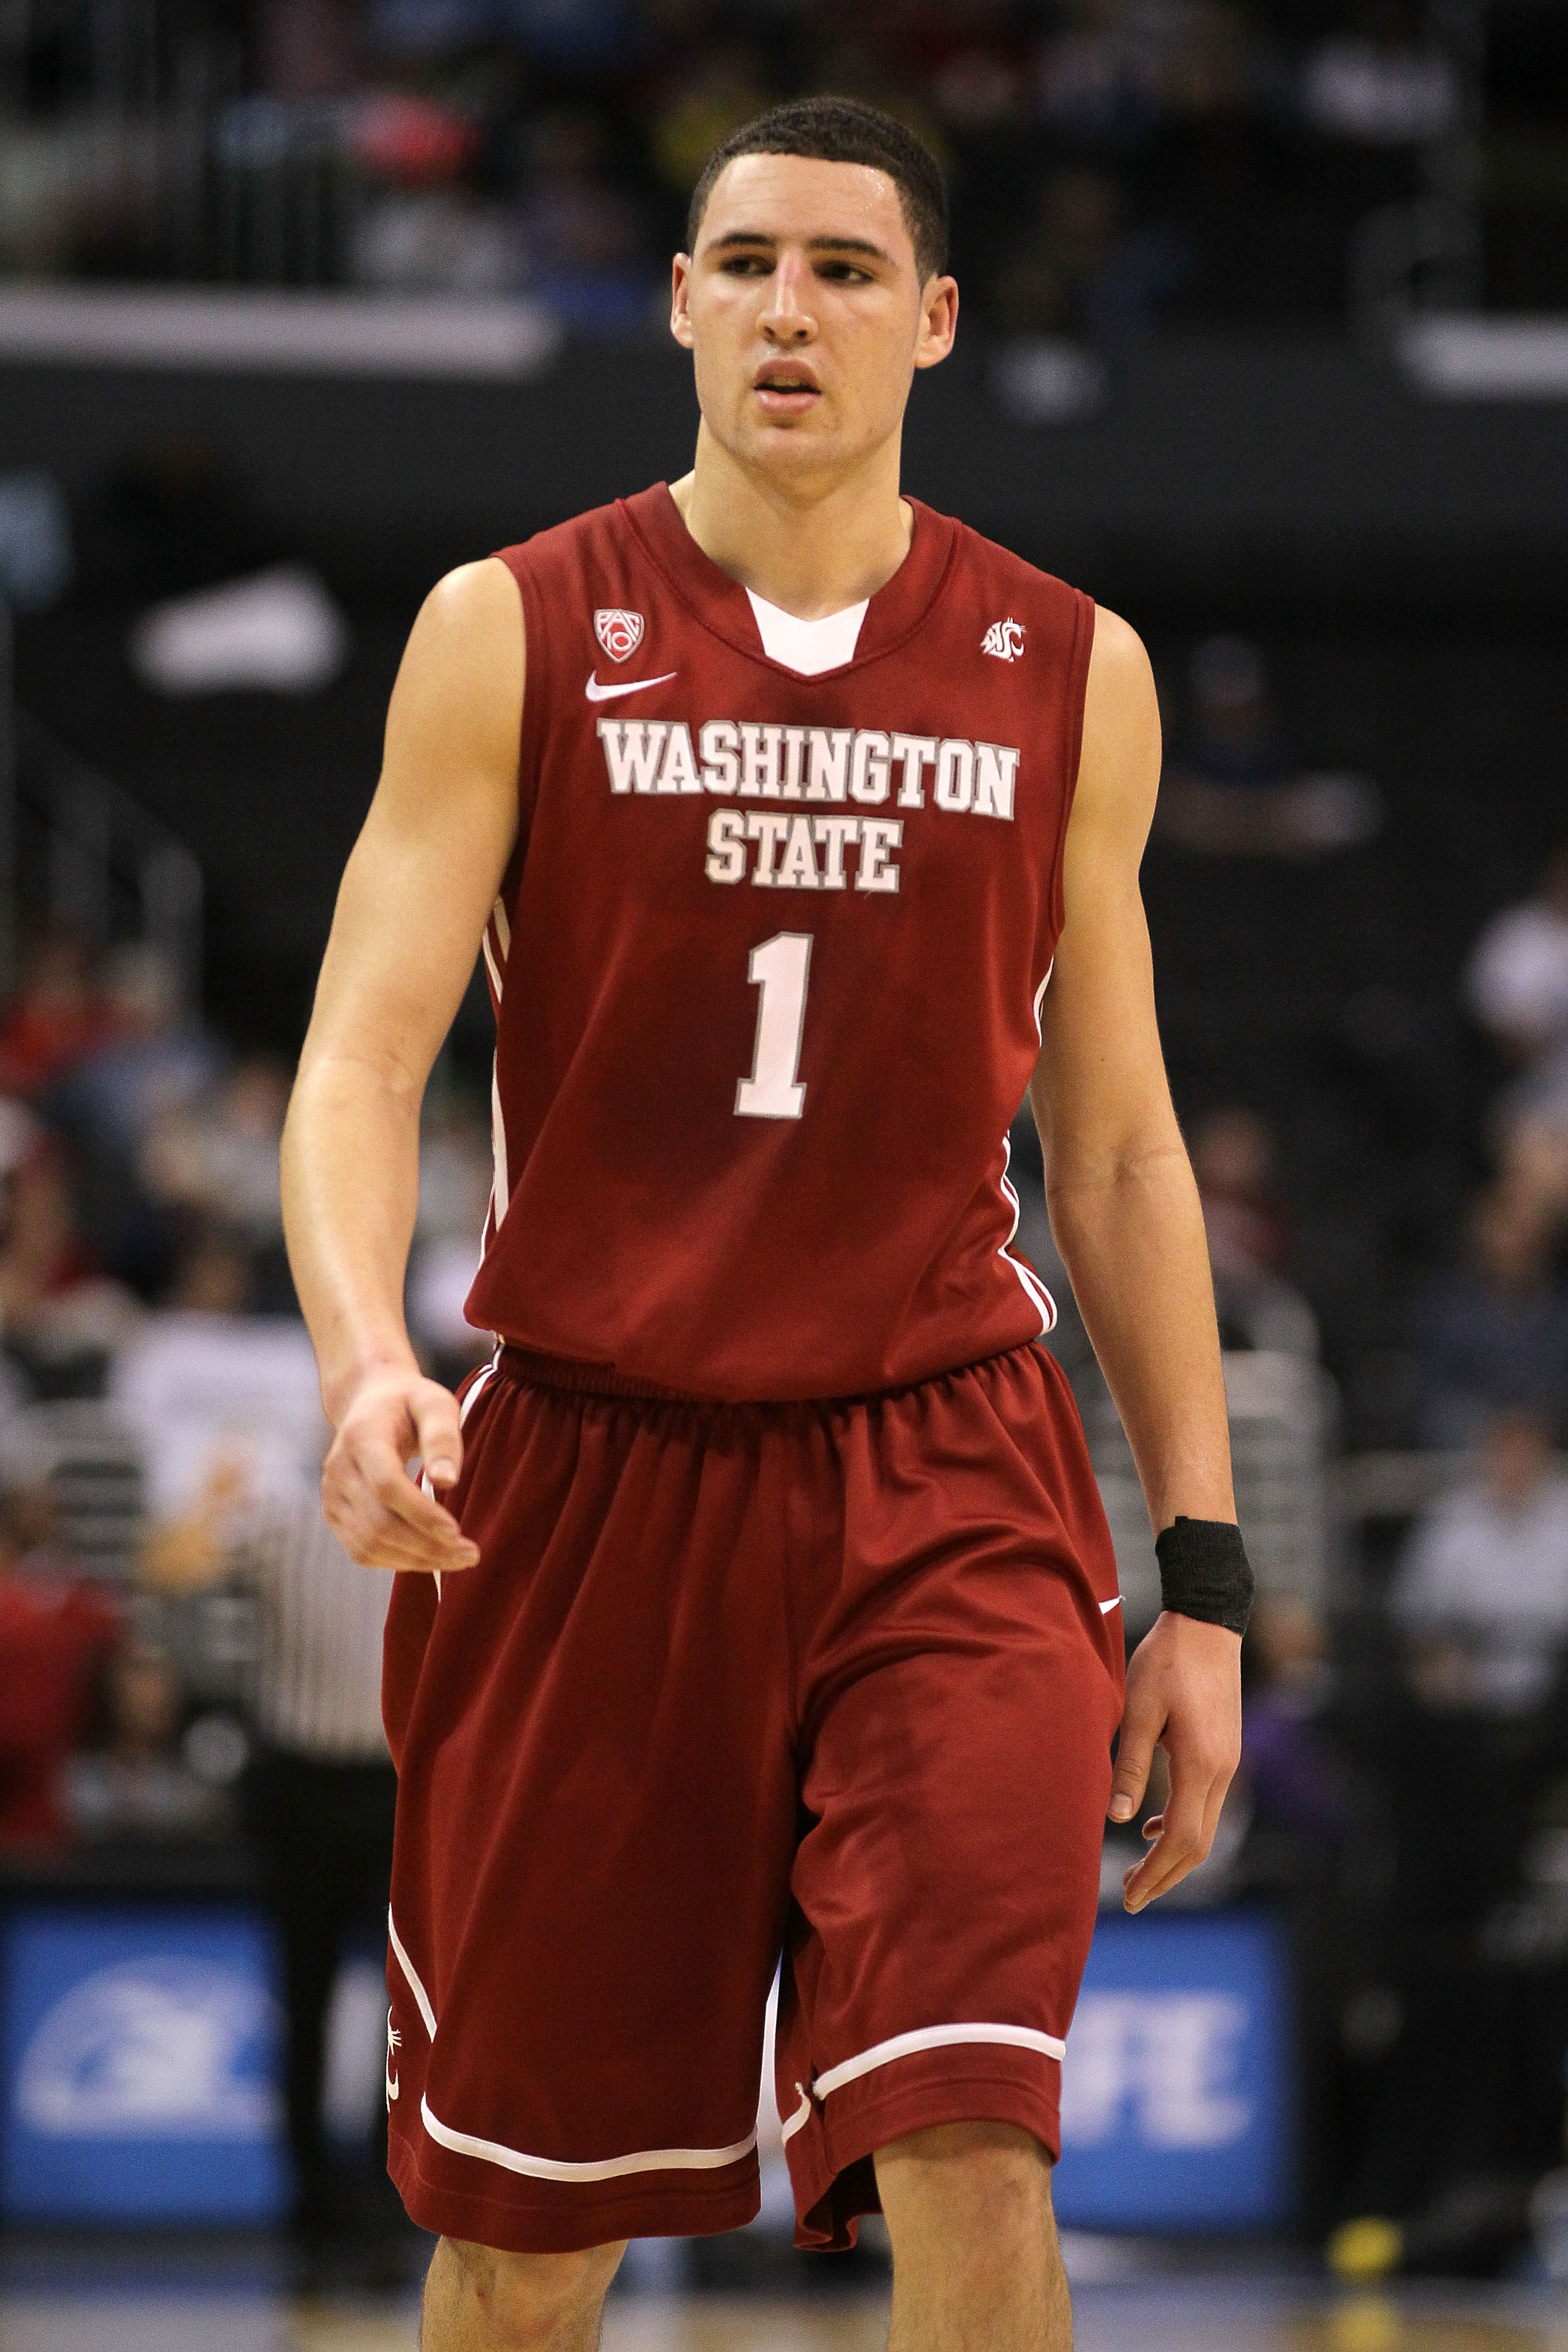 LOS ANGELES, CA - MARCH 10:  Klay Thompson #1 of the Washington State Cougars looks on in the second half against the Washington Huskies in the quarterfinals of the 2011 Pacific Life Pac-10 Men's Basketball Tournament at Staples Center on March 10, 2011 i